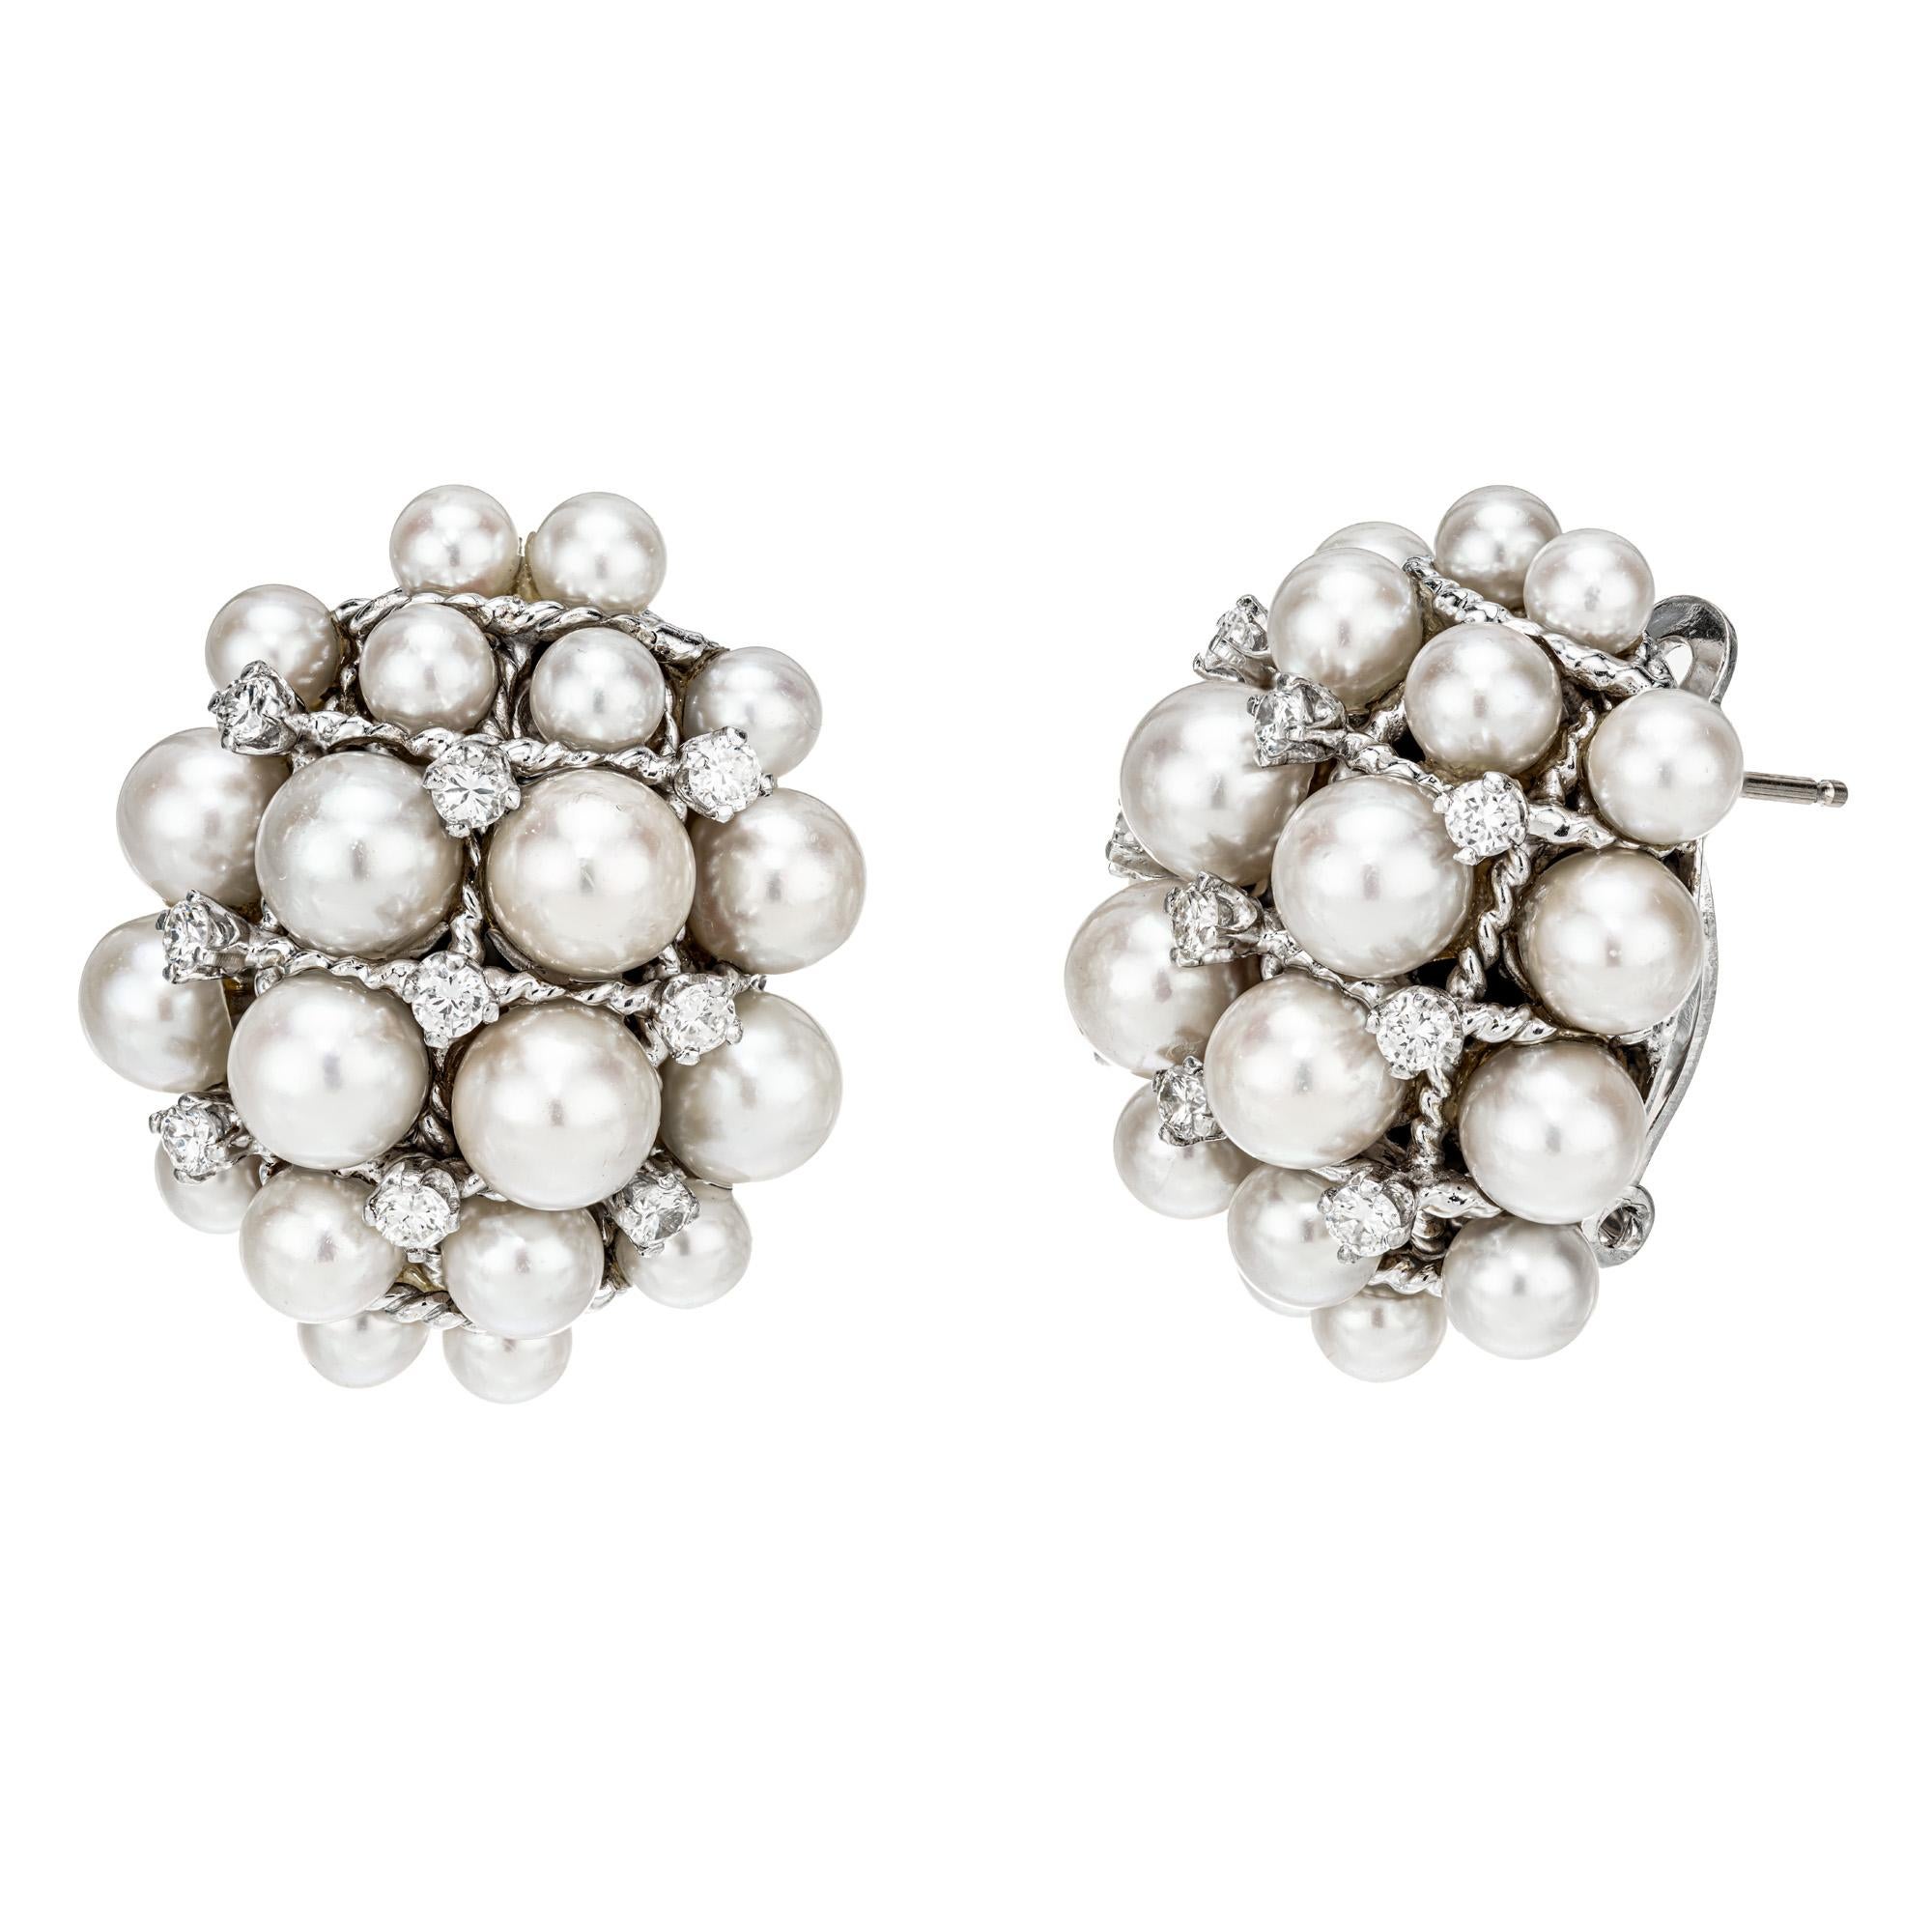 Domed oval 1960's Pearl and diamond cluster clip post earrings. 40 cultured pearls accented with 18 round cut diamonds in 14k white gold clip post earrings. 

40 cultured gray/rose pearls, 3.5mm-5.5mm
18 round diamonds, G-H VS-SI approx. .75cts
14k